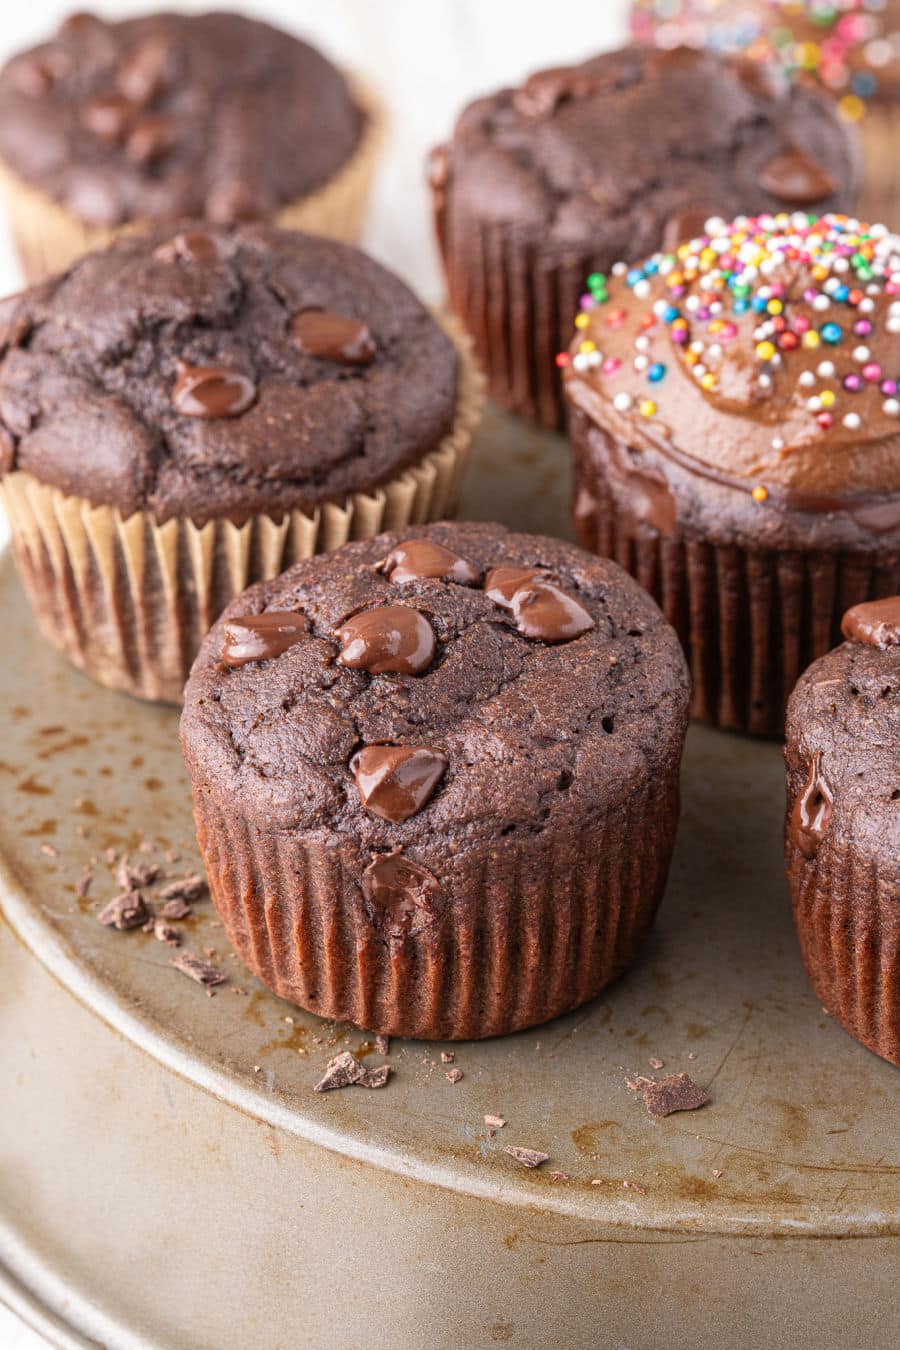 Chocolate cupcakes on a stand.